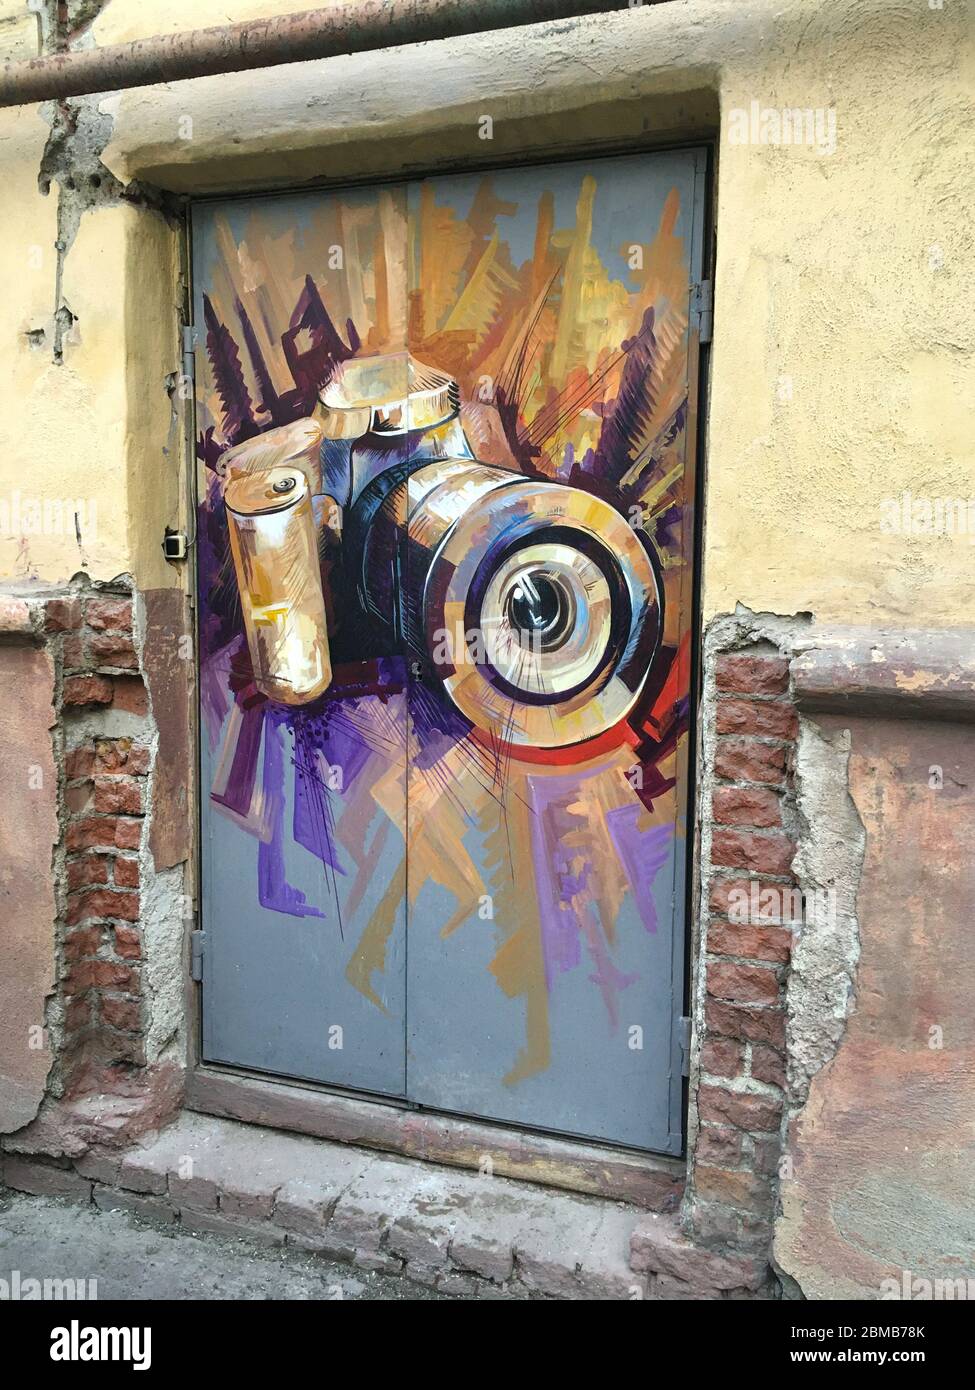 Graffiti on the wall. The image of the camera. Drawing on the whole door. Old city. Stock Photo